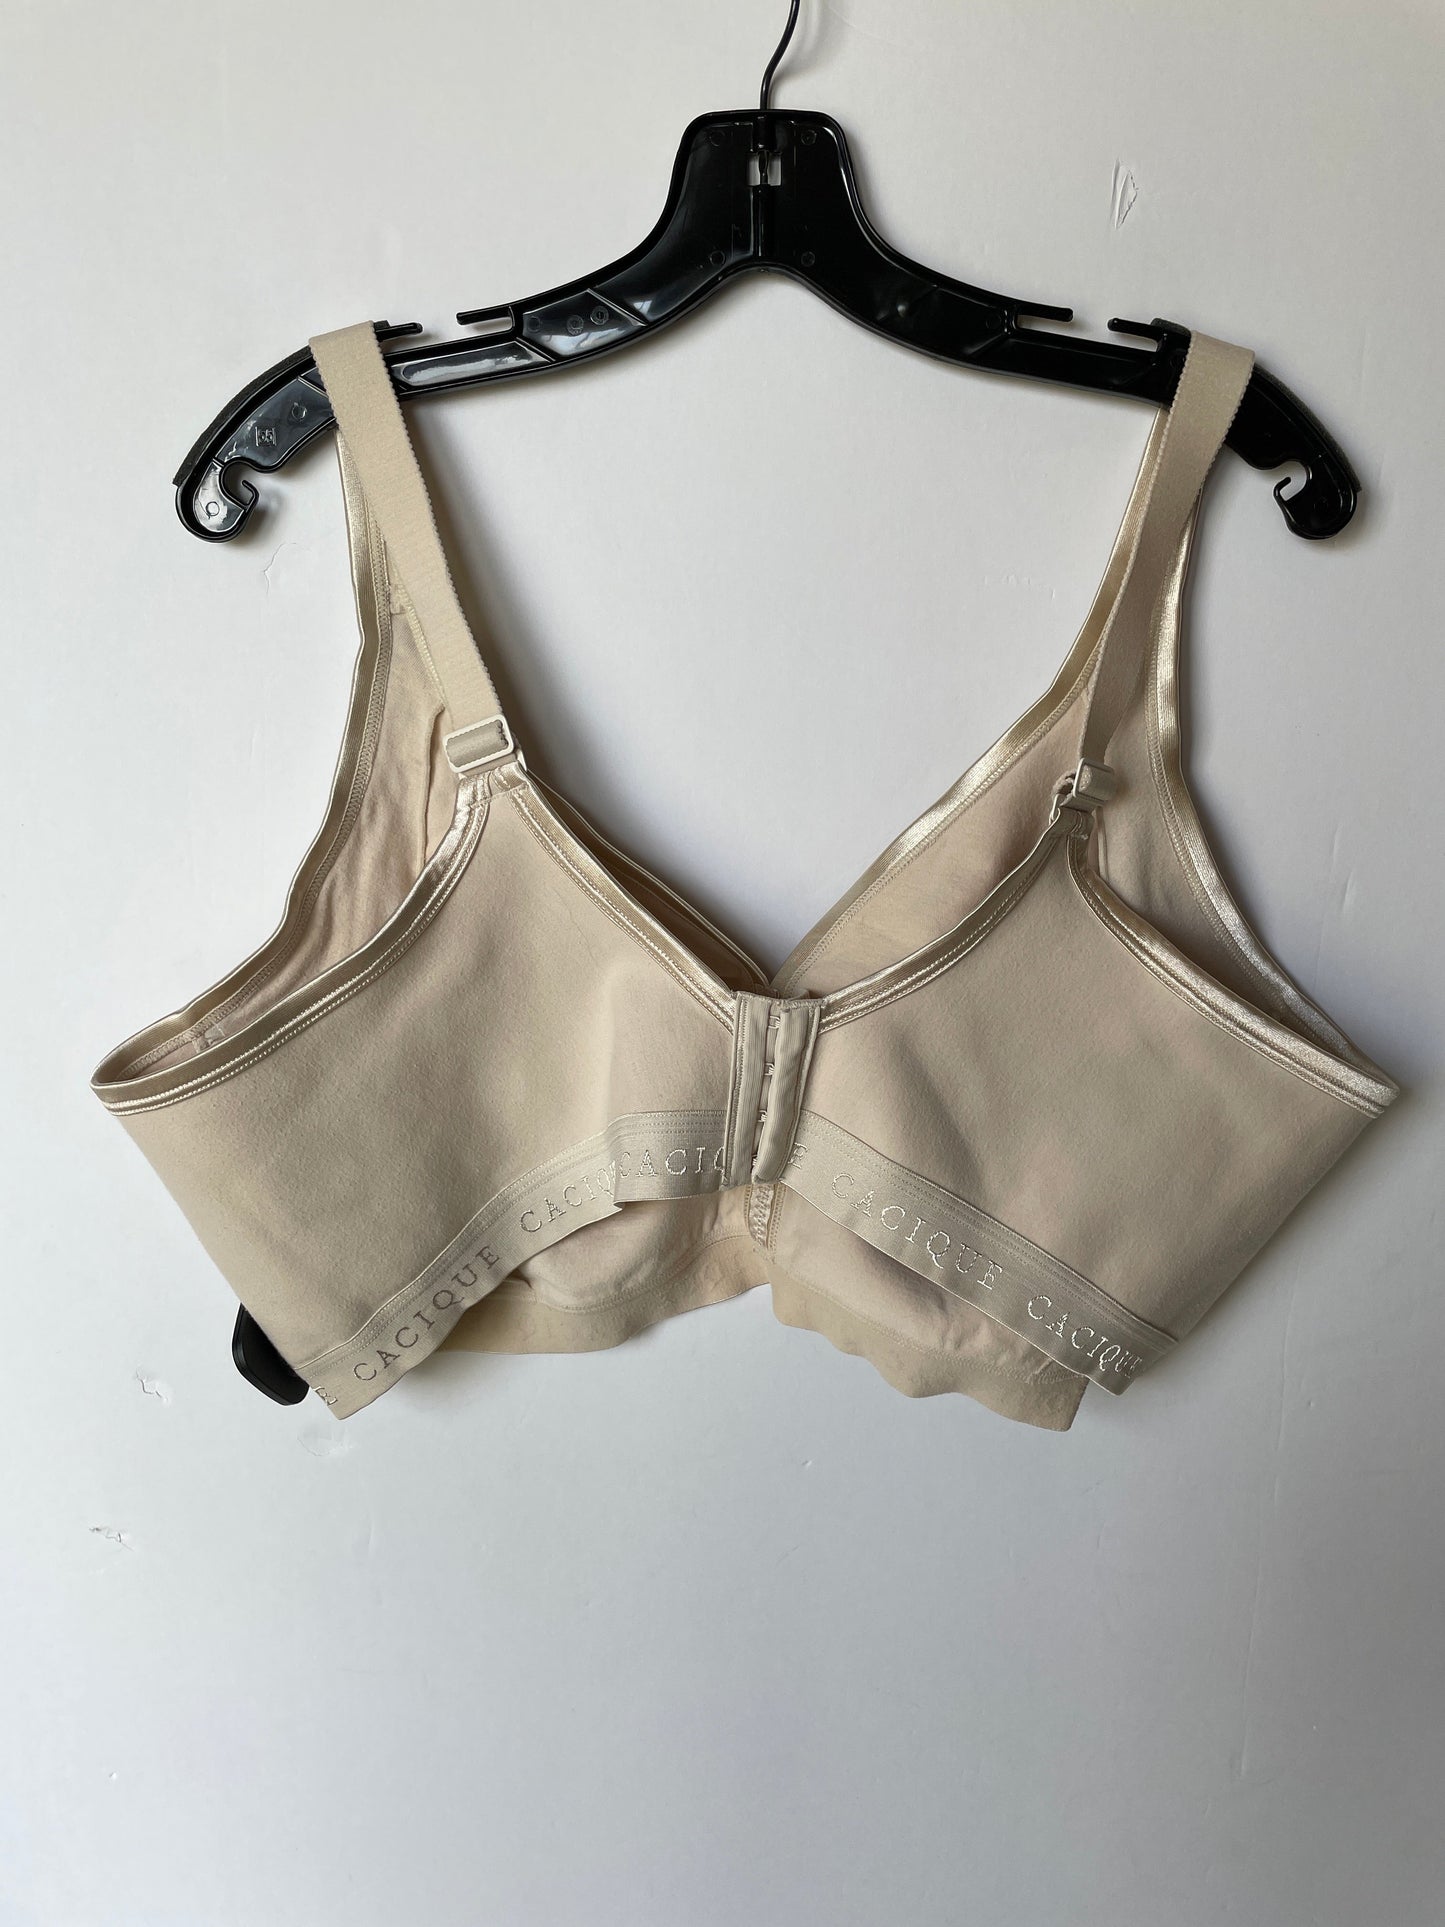 Bra By Cacique  Size: 4x